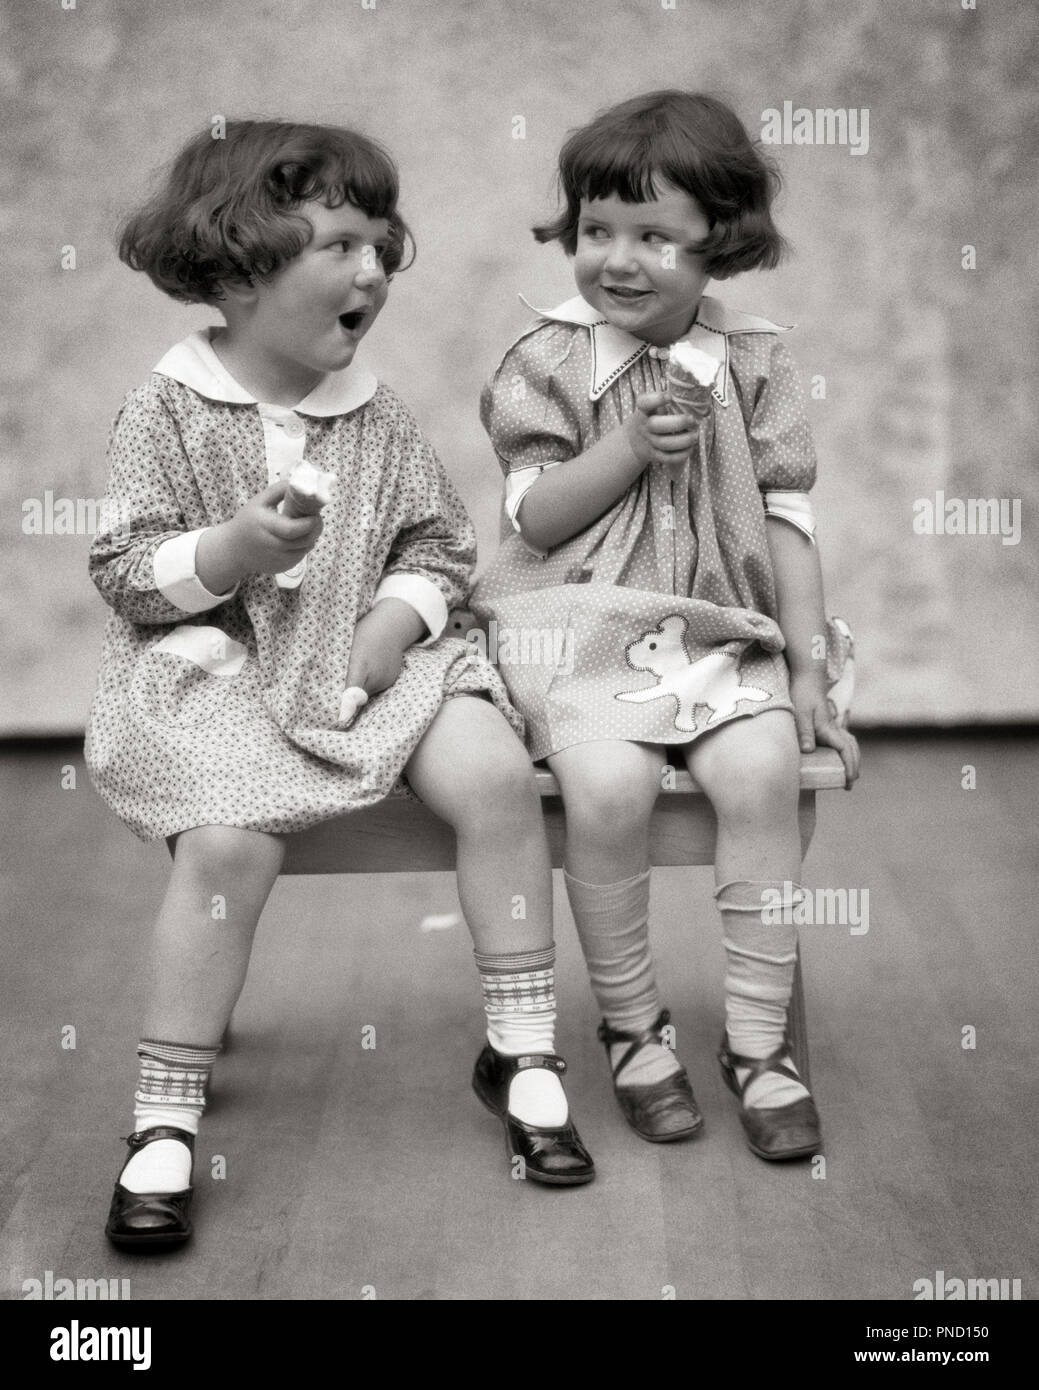 1920s TWO LITTLE GIRLS SITTING ON BENCH EATING ICE CREAM CONES AND TALKING  - f2181 HAR001 HARS COMMUNICATION LAUGH TWIN IDENTICAL DOUBLE PLEASED JOY FEMALES STUDIO SHOT HEALTHINESS HOME LIFE COPY SPACE FRIENDSHIP HALF-LENGTH MATCH SIBLINGS SISTERS EXPRESSIONS B&W BRUNETTE MATCHING SAME HAPPINESS CHEERFUL STYLES AND MARY JANE CONES SIBLING SMILES CONNECTION MARY JANES JOYFUL STYLISH LOOK-ALIKE DUPLICATE FASHIONS JUVENILES LOOK ALIKE TOGETHERNESS BLACK AND WHITE CAUCASIAN ETHNICITY CLONE HAR001 OLD FASHIONED PLAYMATES Stock Photo